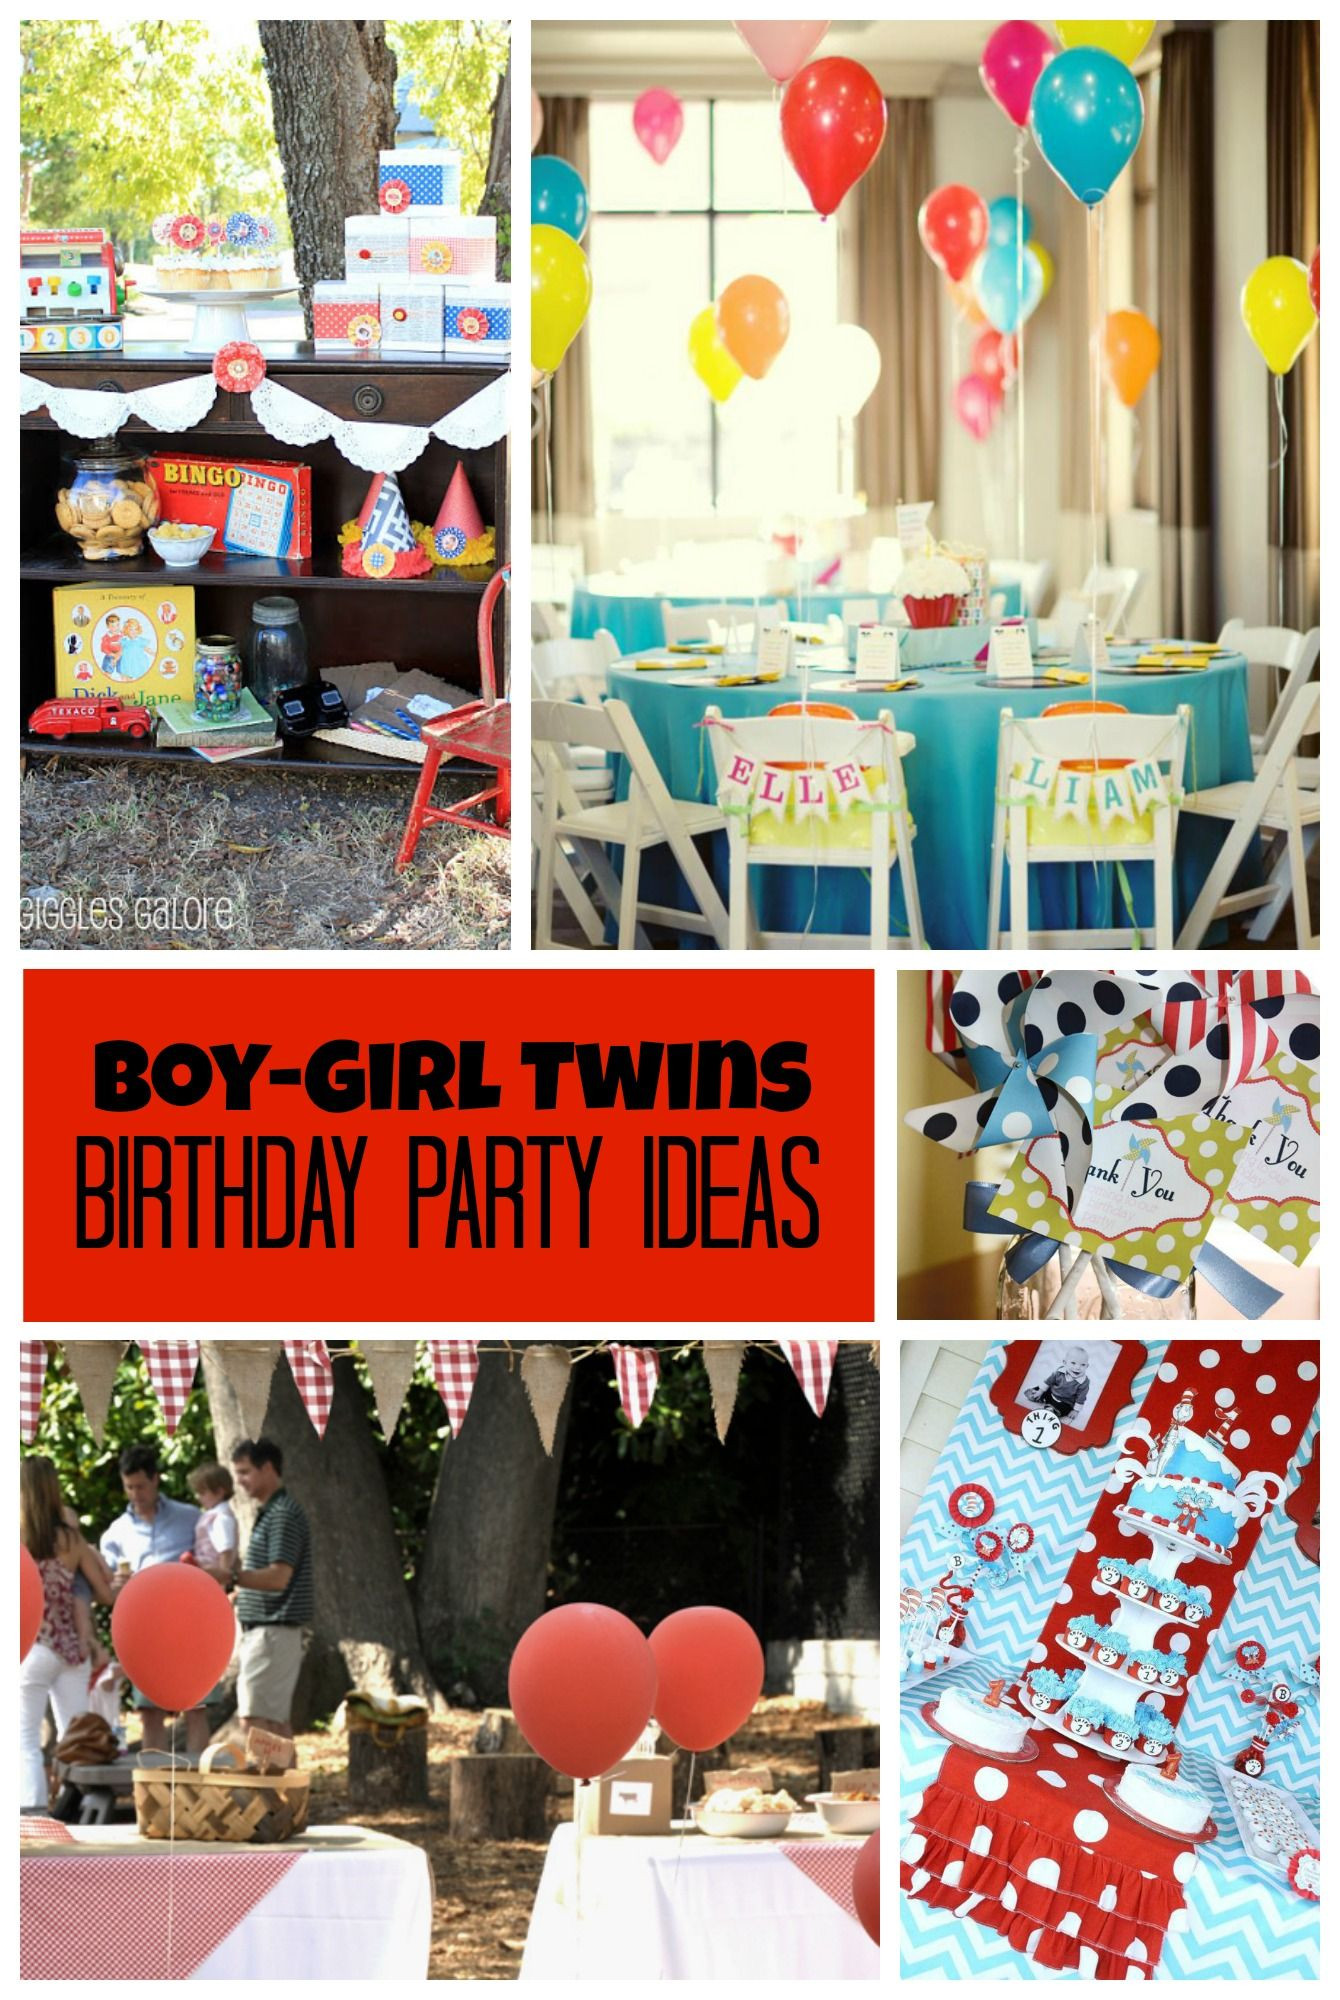 Twin First Birthday Party Ideas
 Birthday Party Ideas for Boy Girl Twins